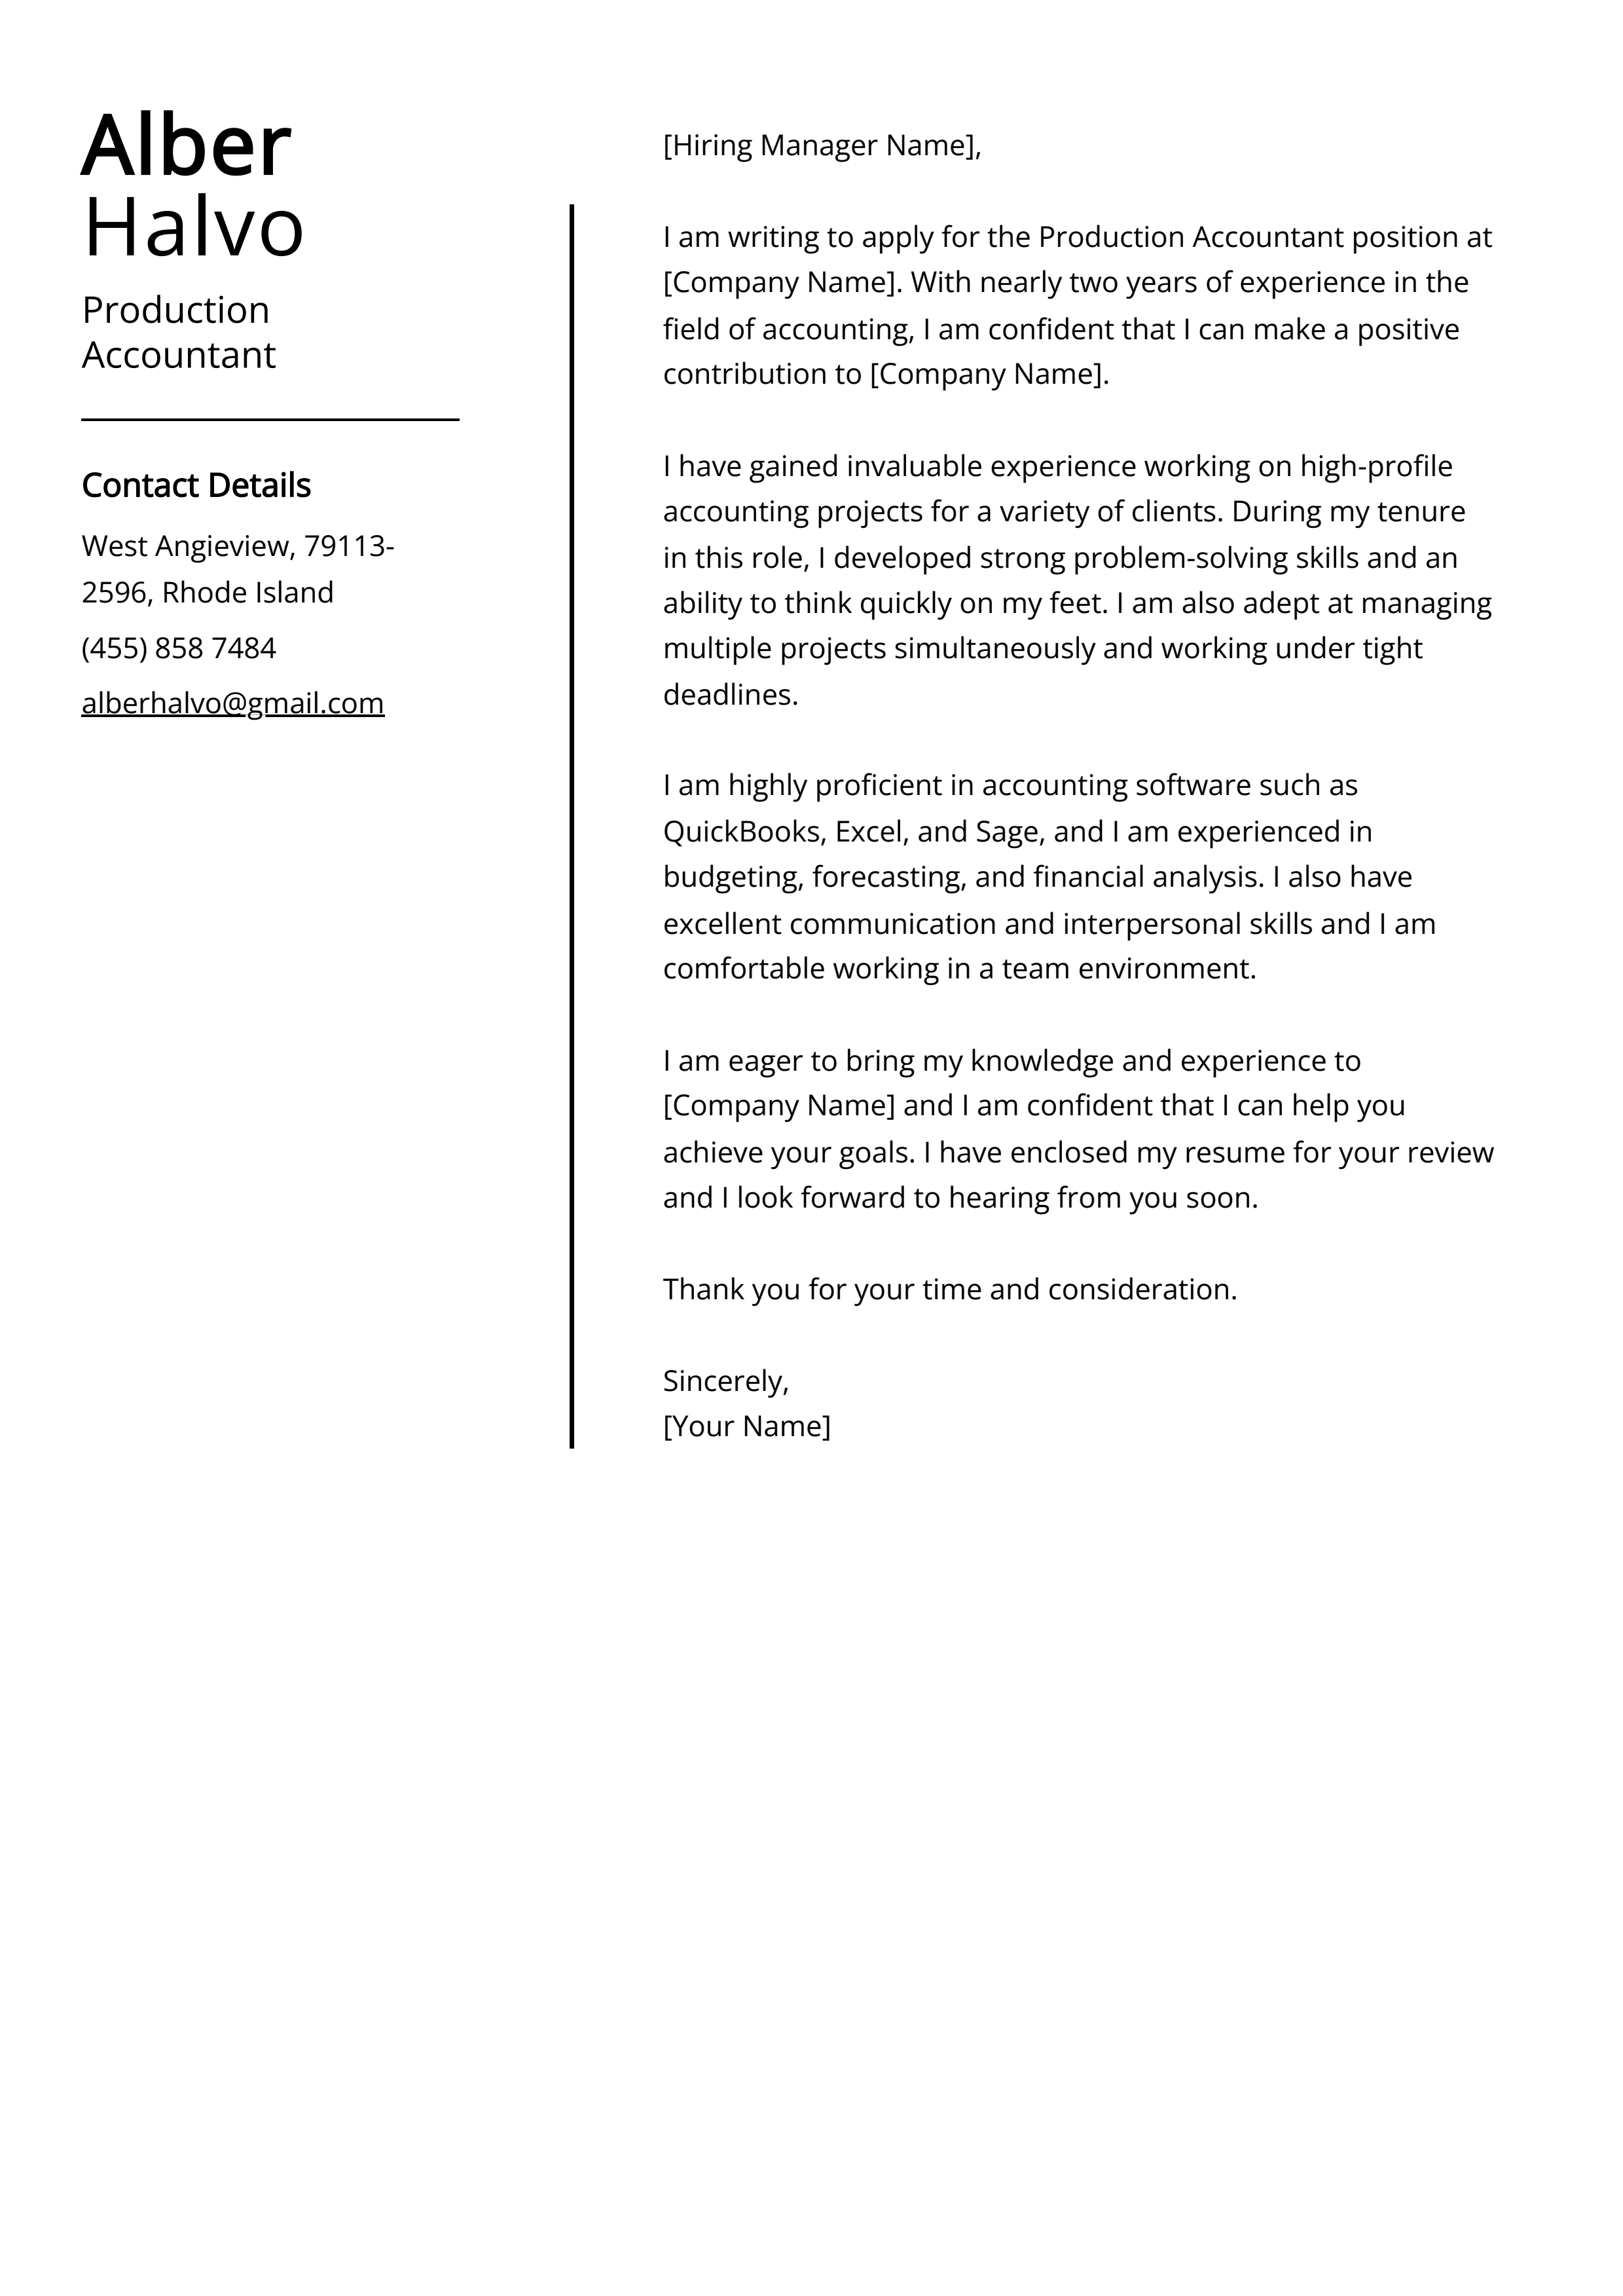 Production Accountant Cover Letter Example